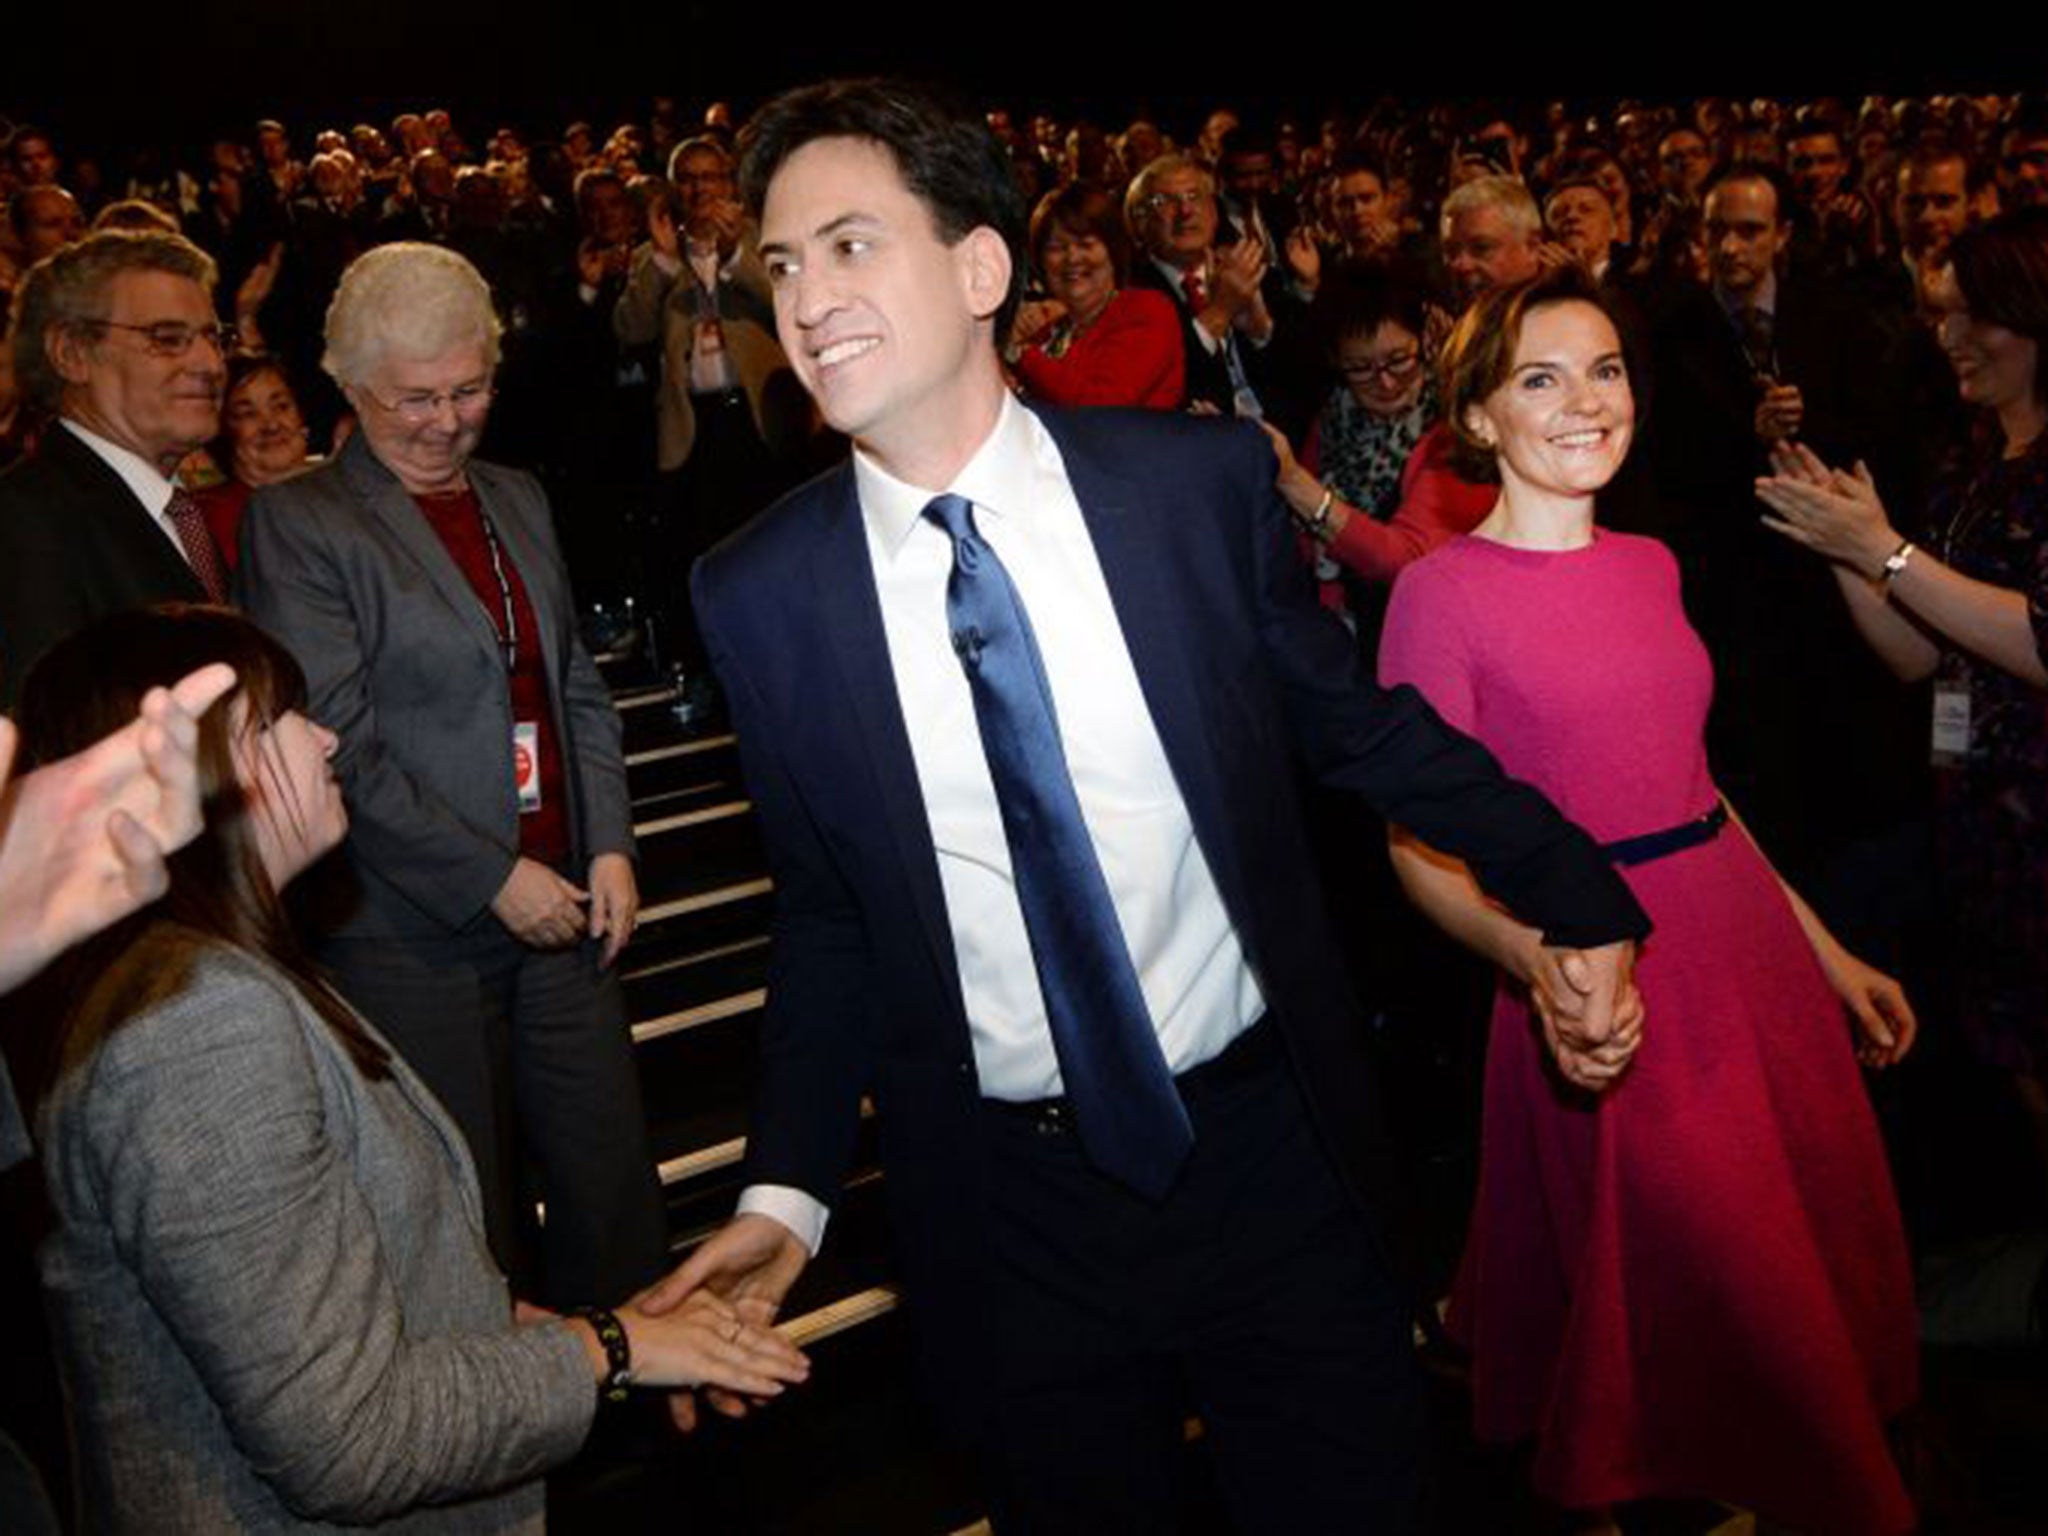 Miliband and wife Justine after his speech